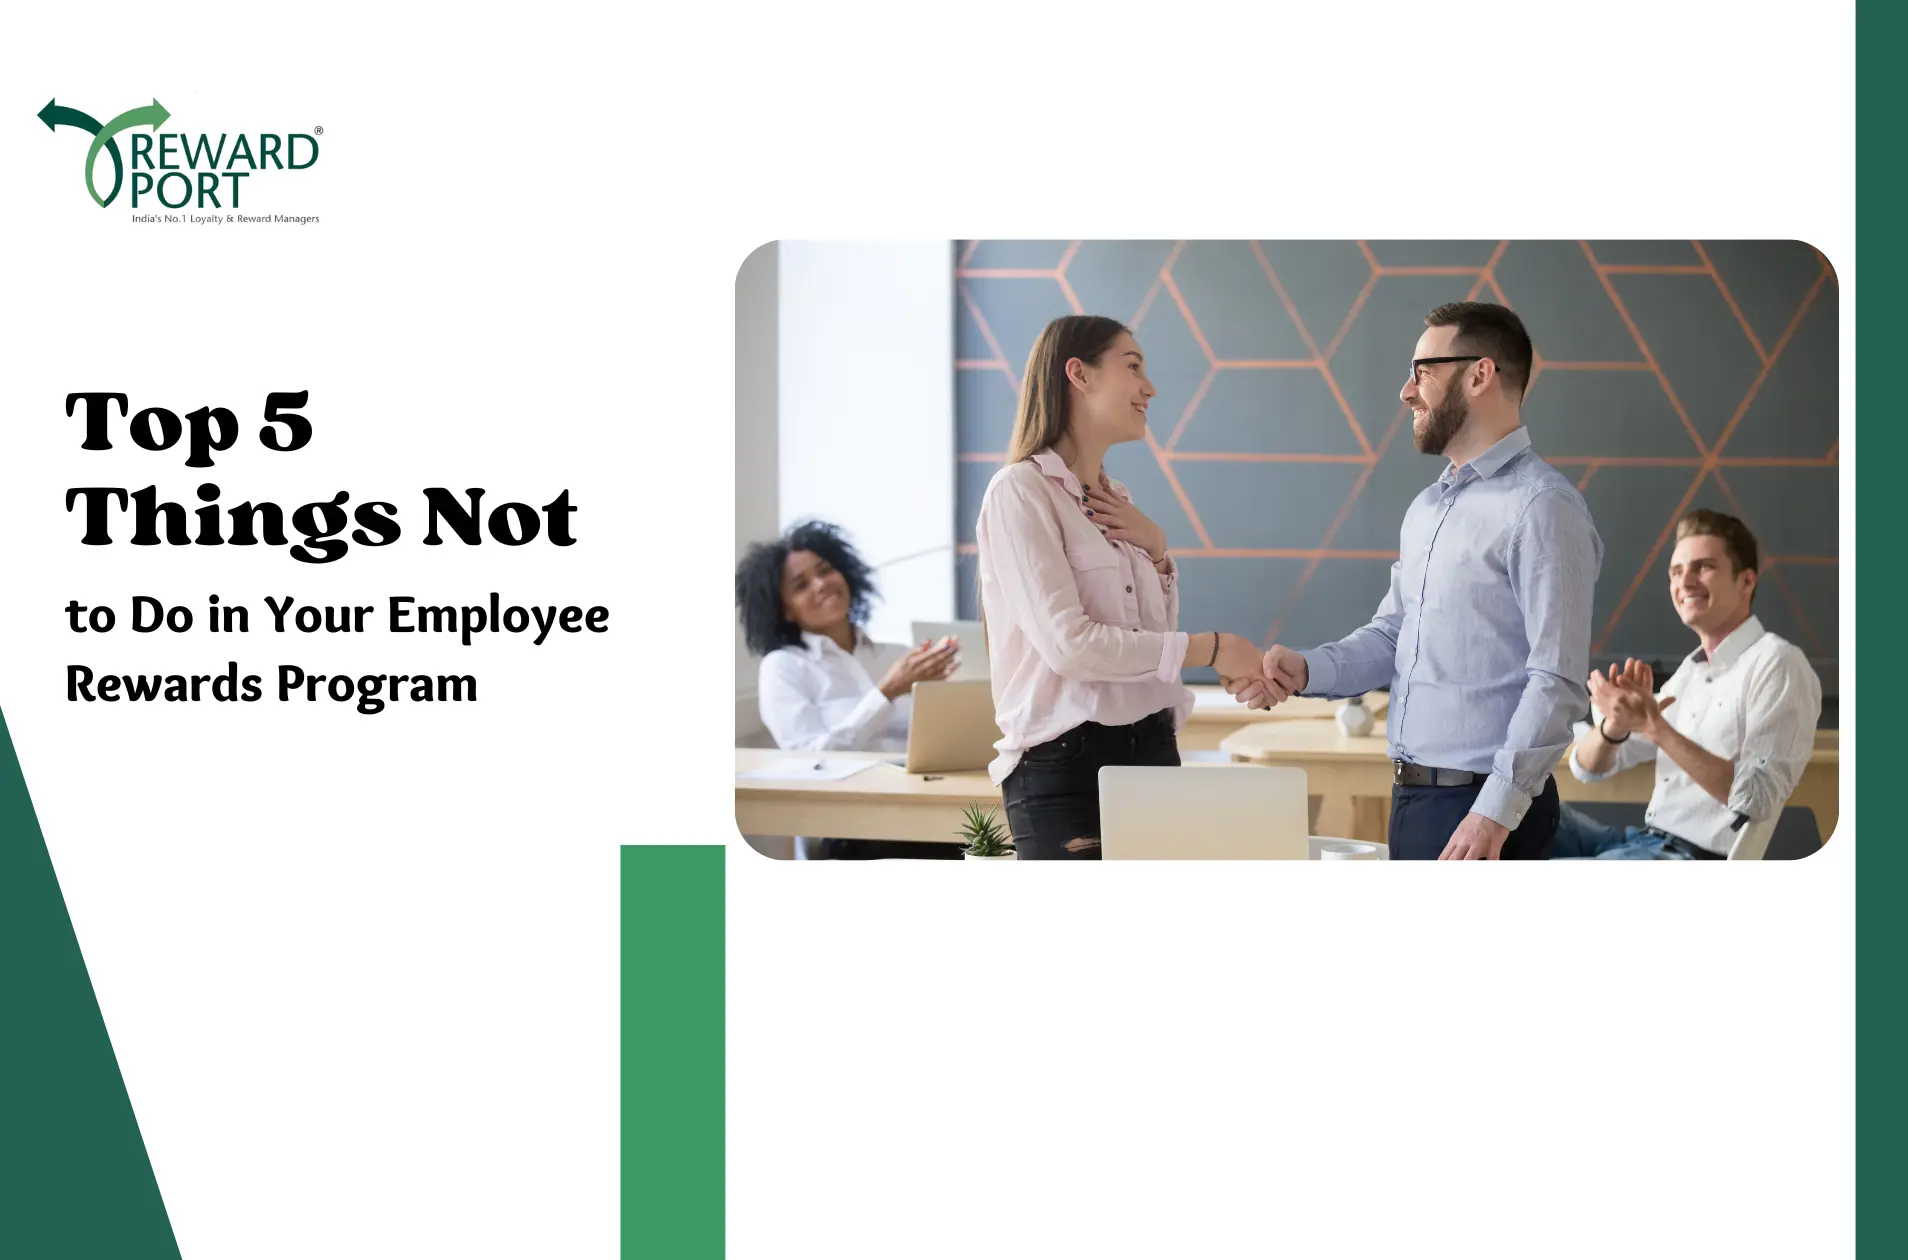 Top 5 Things Not to Do in Your Employee Rewards Program